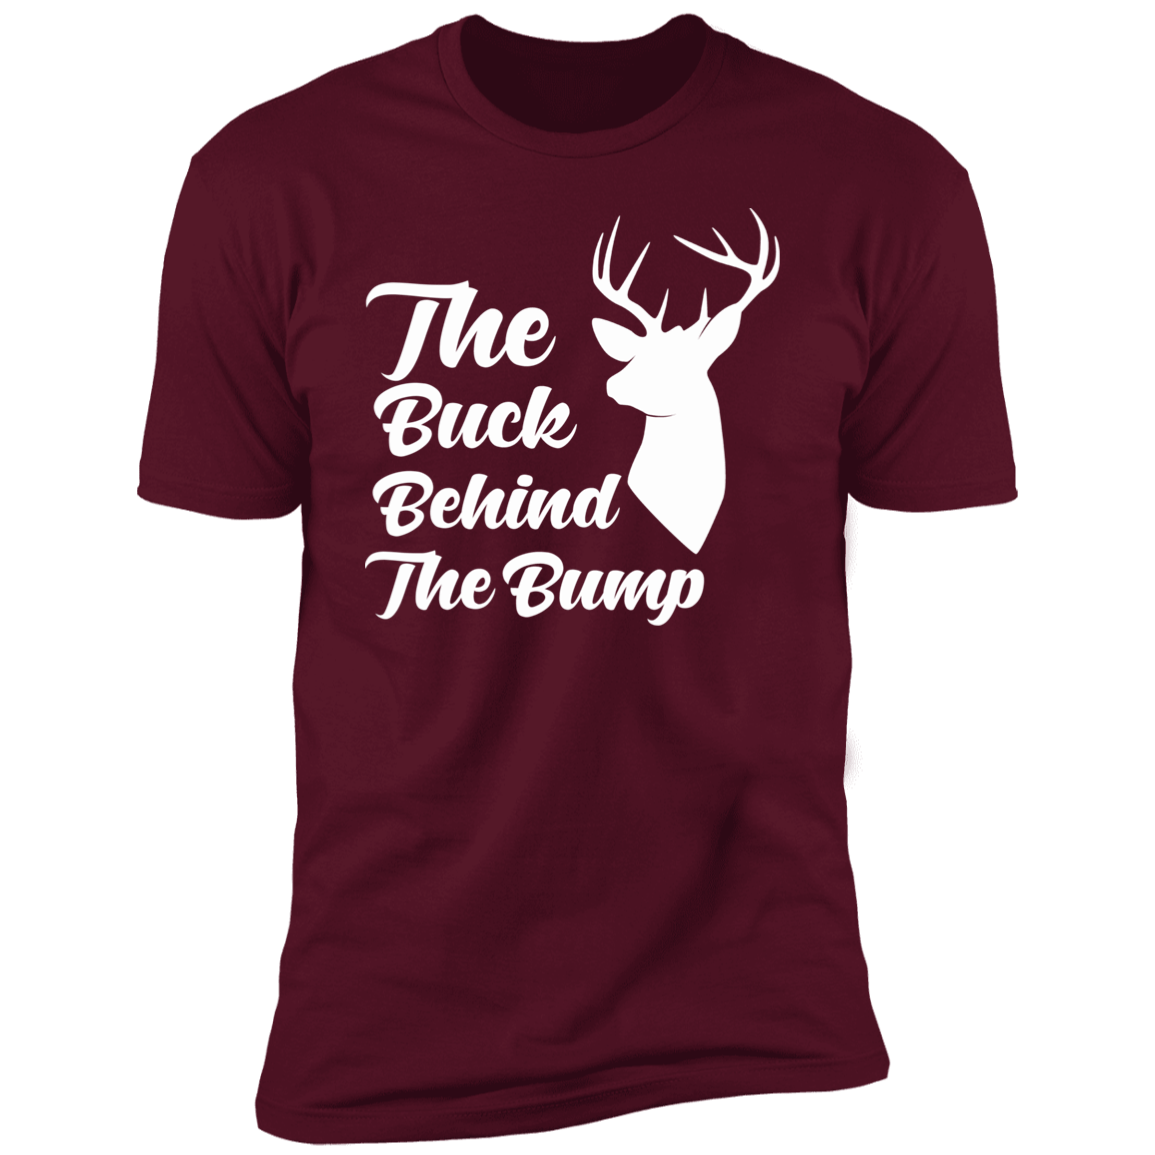 The Buck Behind The Bump (6078854004908)